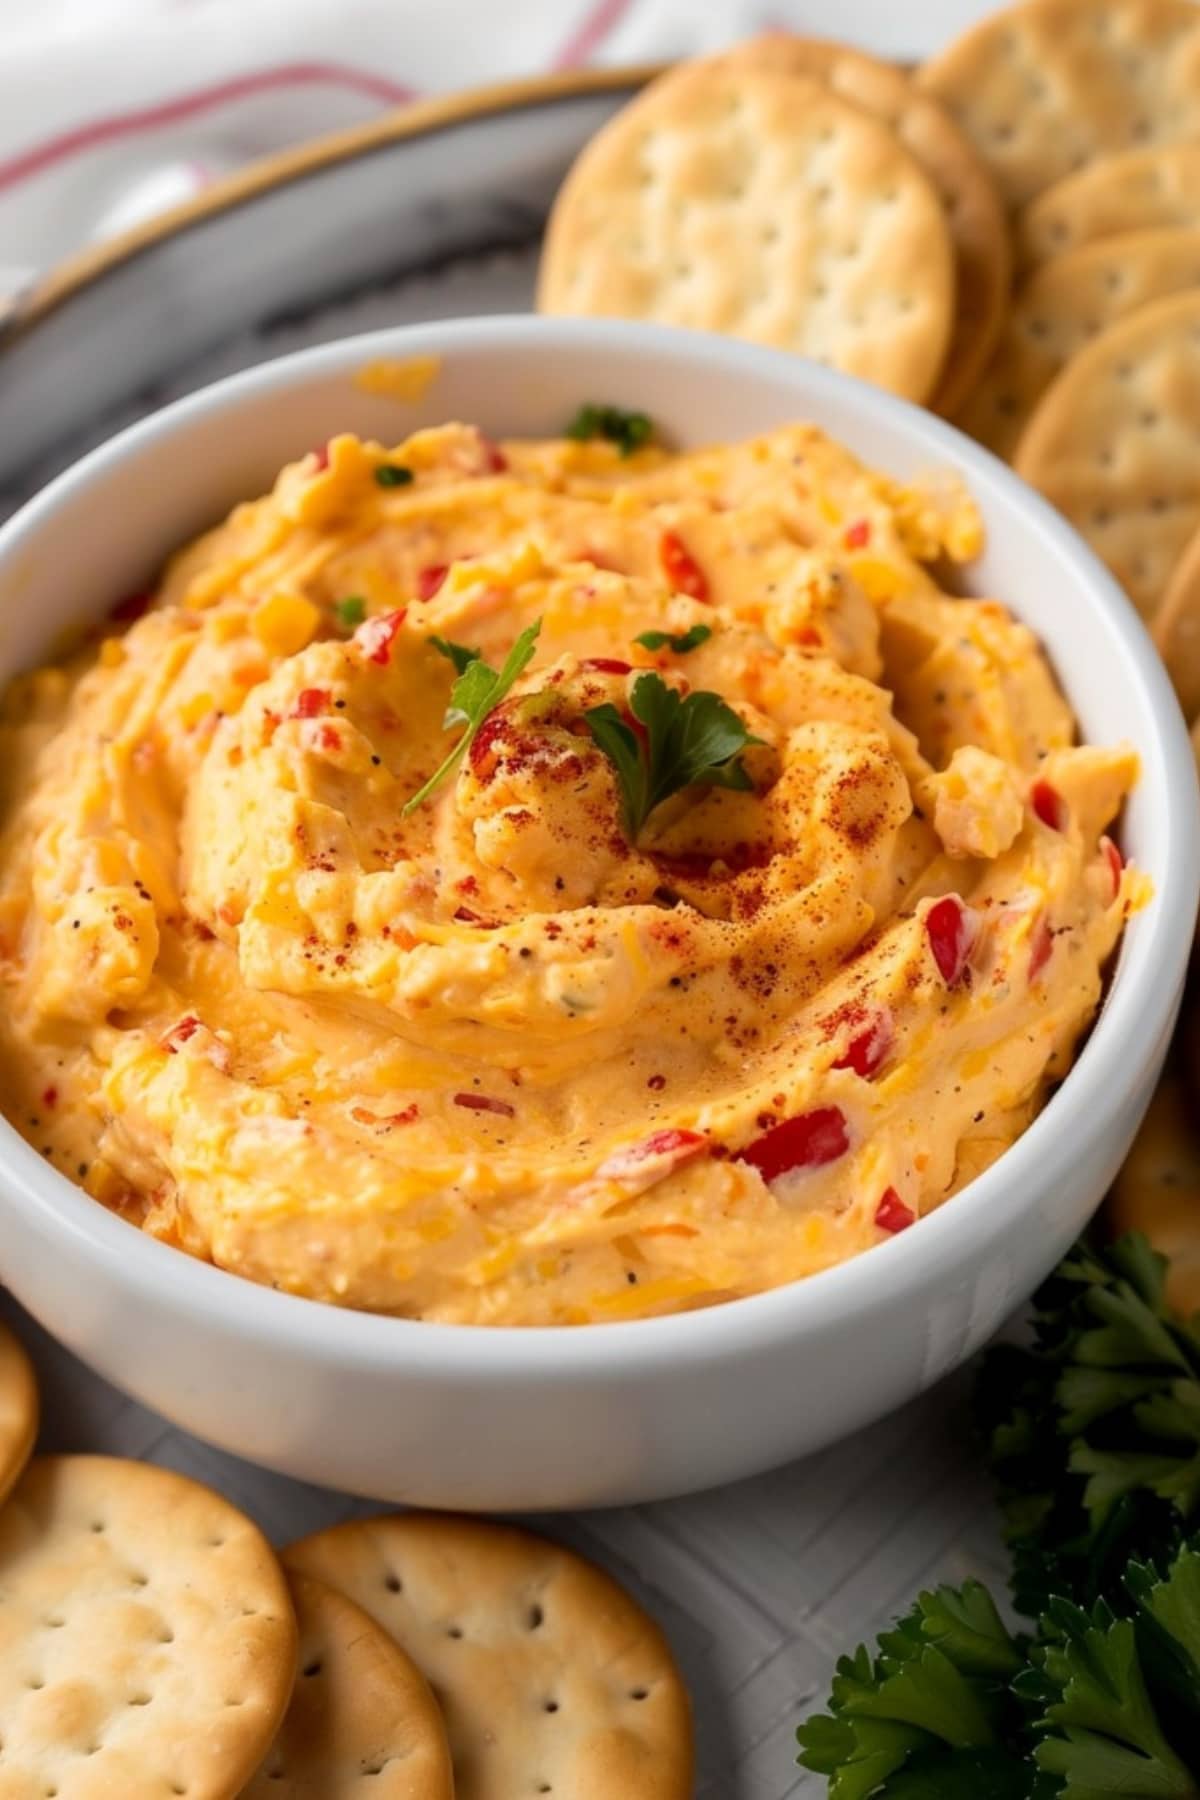 Bowl of Homemade Pimento Cheese with Crackers